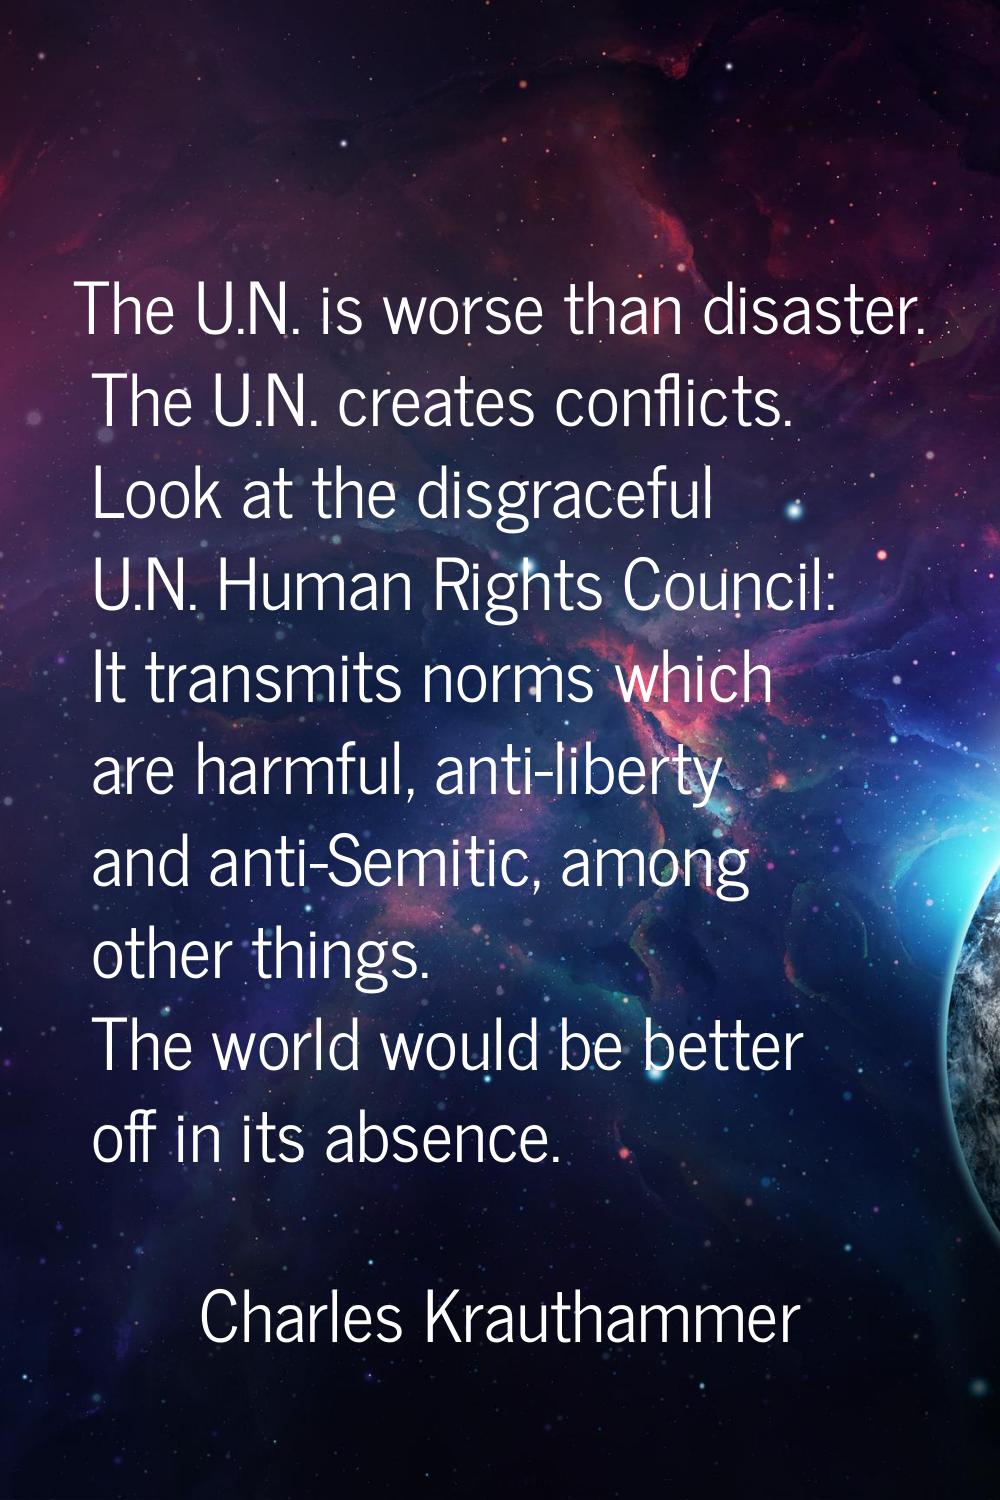 The U.N. is worse than disaster. The U.N. creates conflicts. Look at the disgraceful U.N. Human Rig